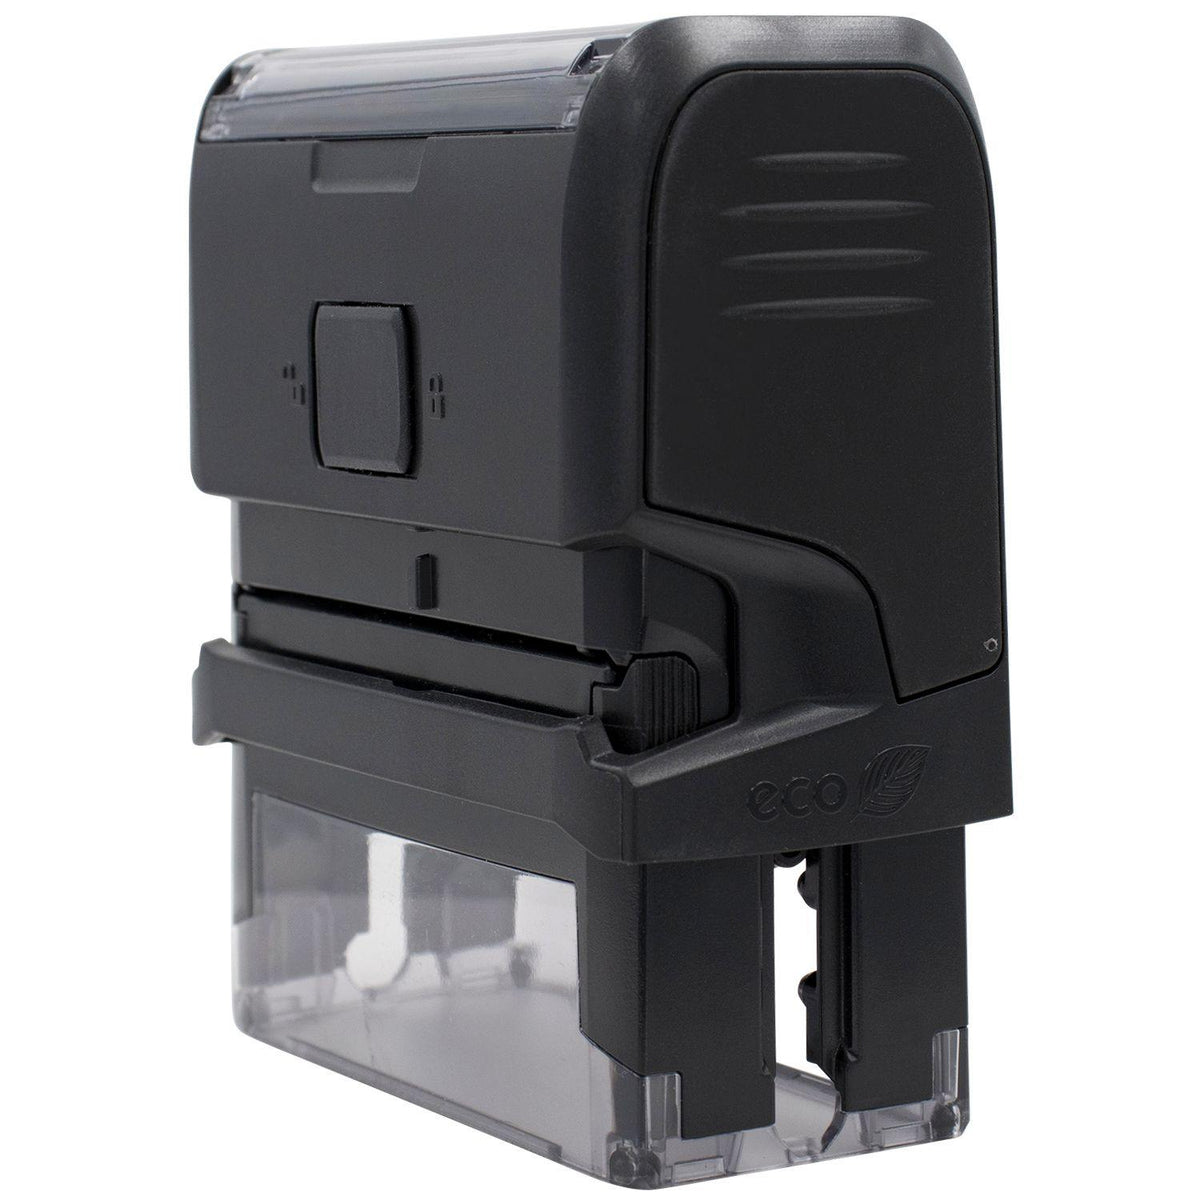 Side View of Large Self-Inking Bold FYI Stamp at an Angle